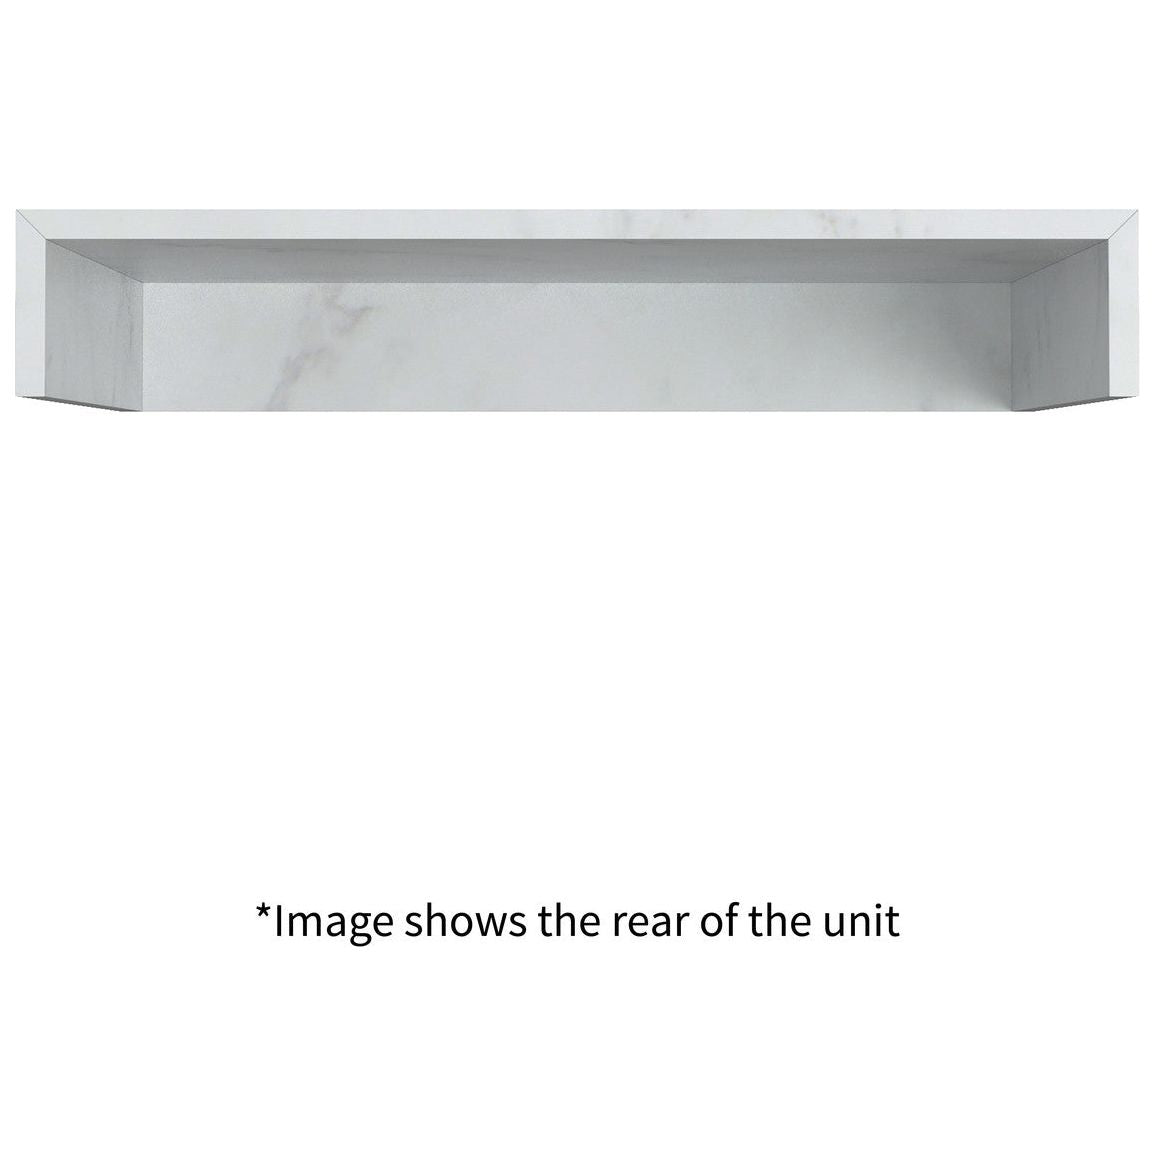 Hayes 600mm Wall Hung Basin Shelf - White Marble